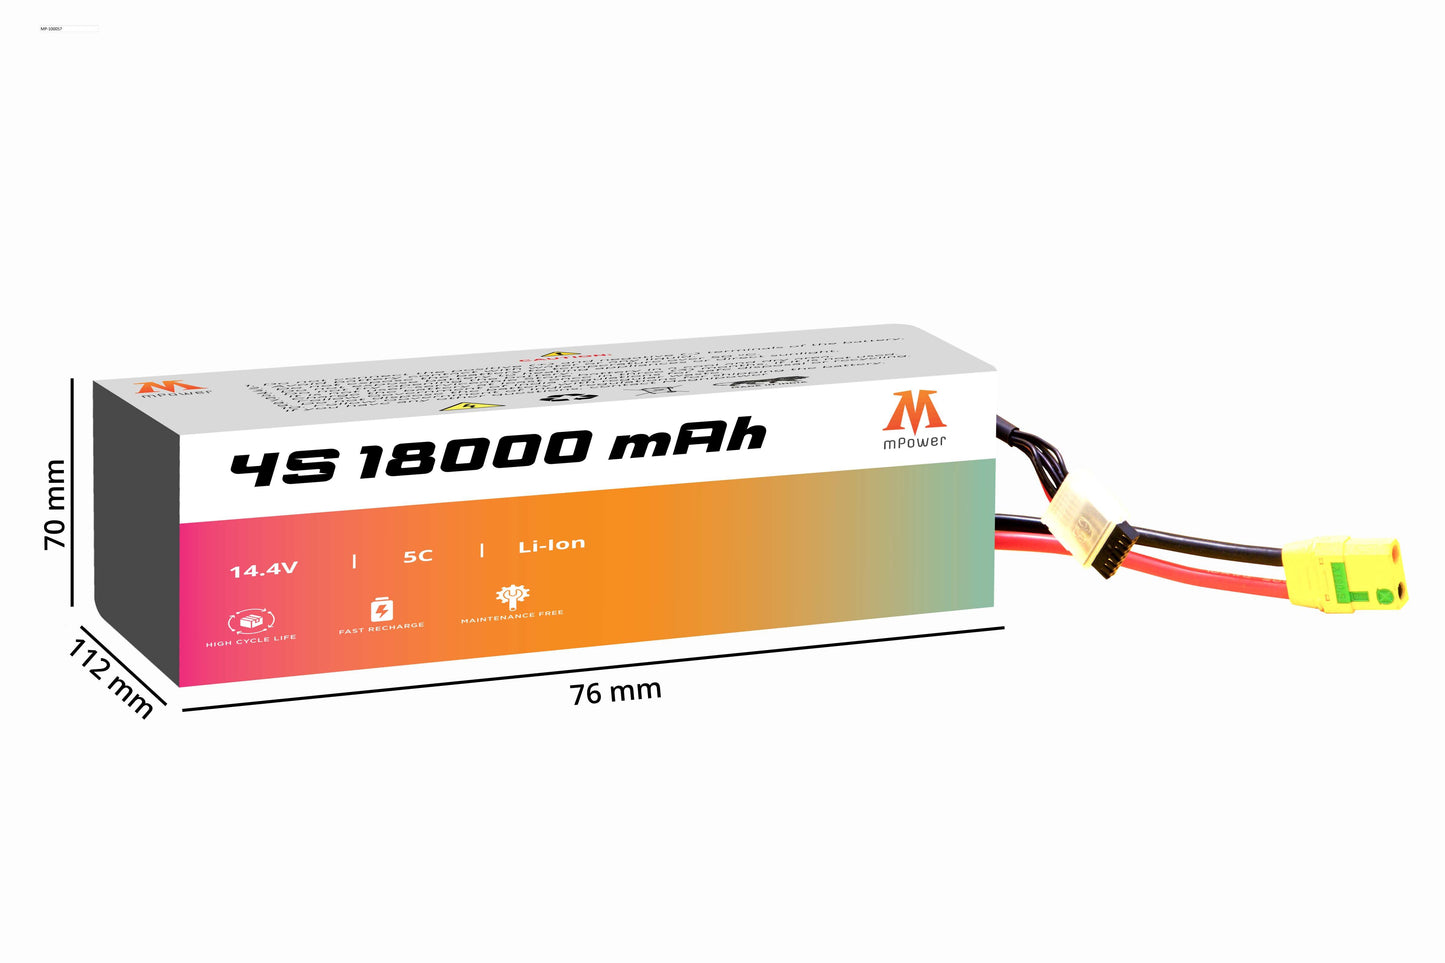 mPower 4S 18000mAh Lithium-Ion Battery for Survey Drones-mpowerlithium